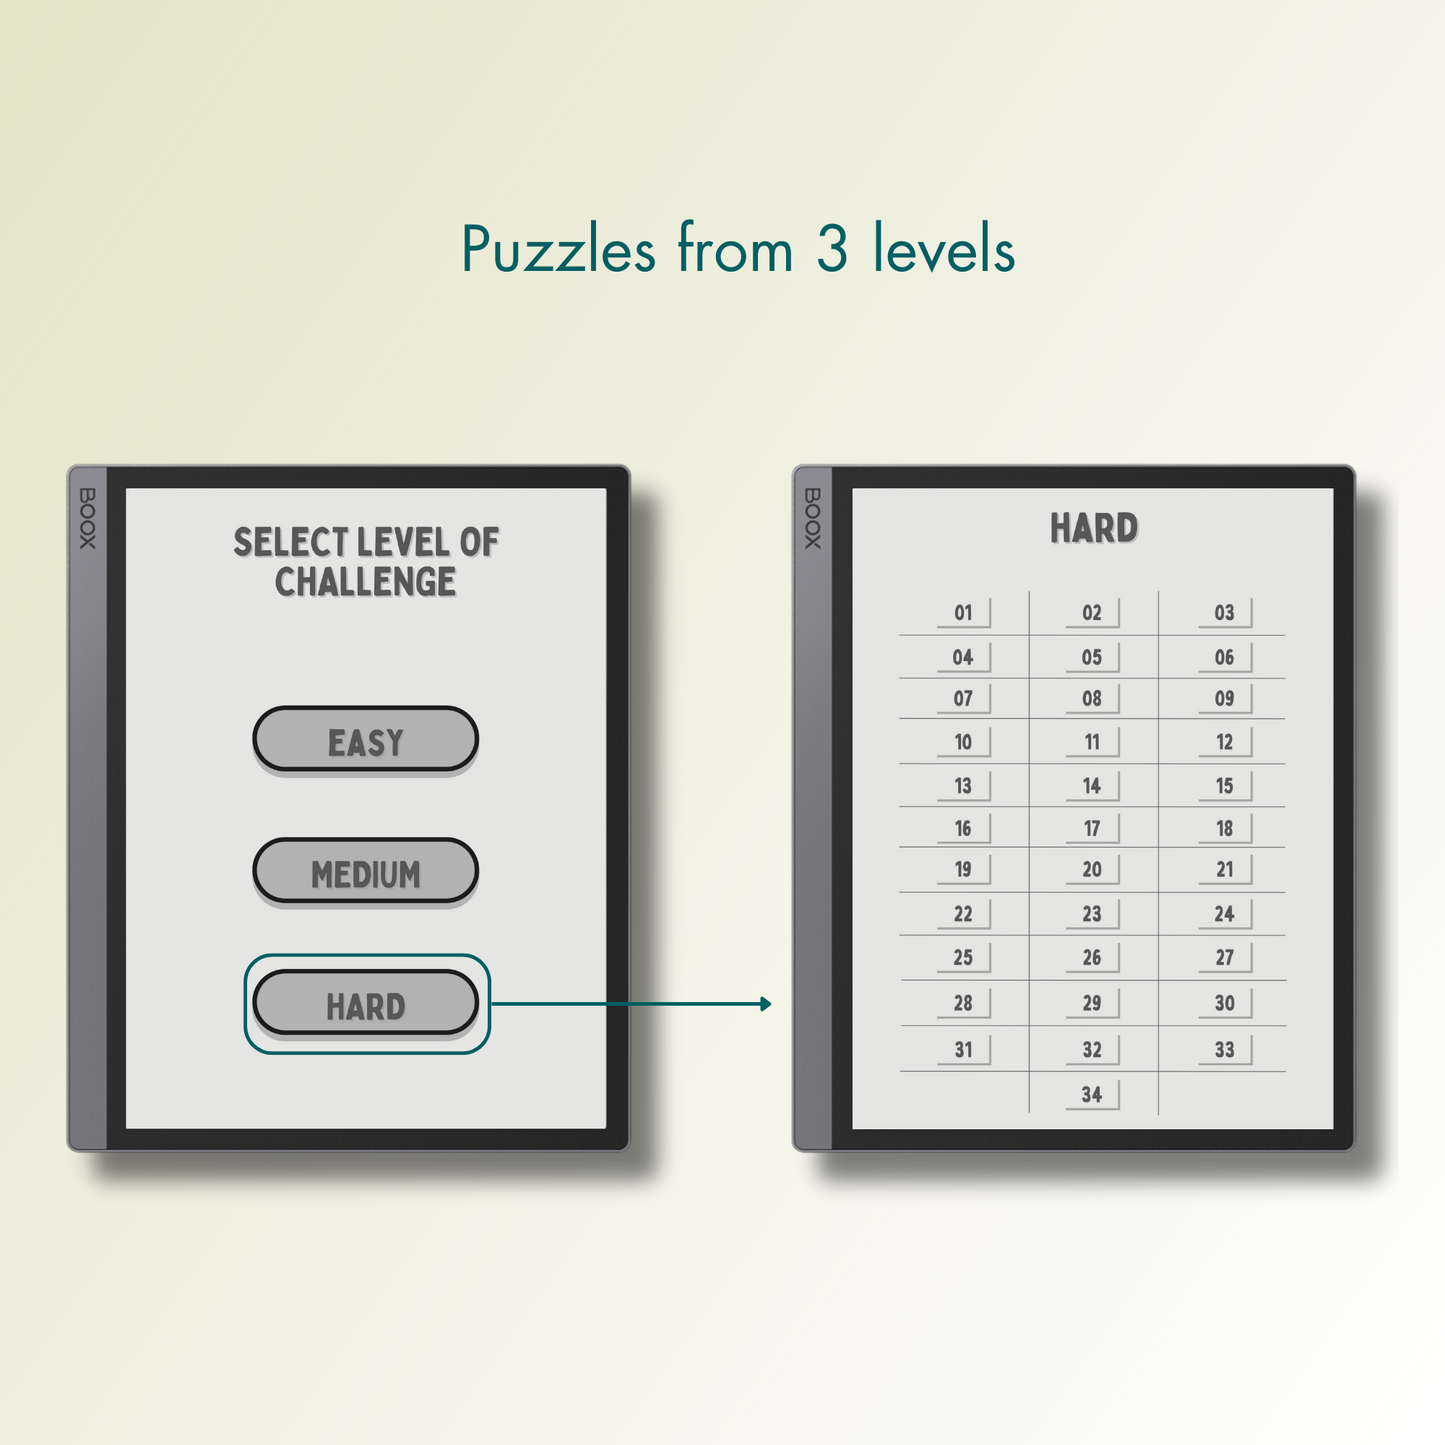 Onyx Boox Word Search Puzzles in 3 different levels.